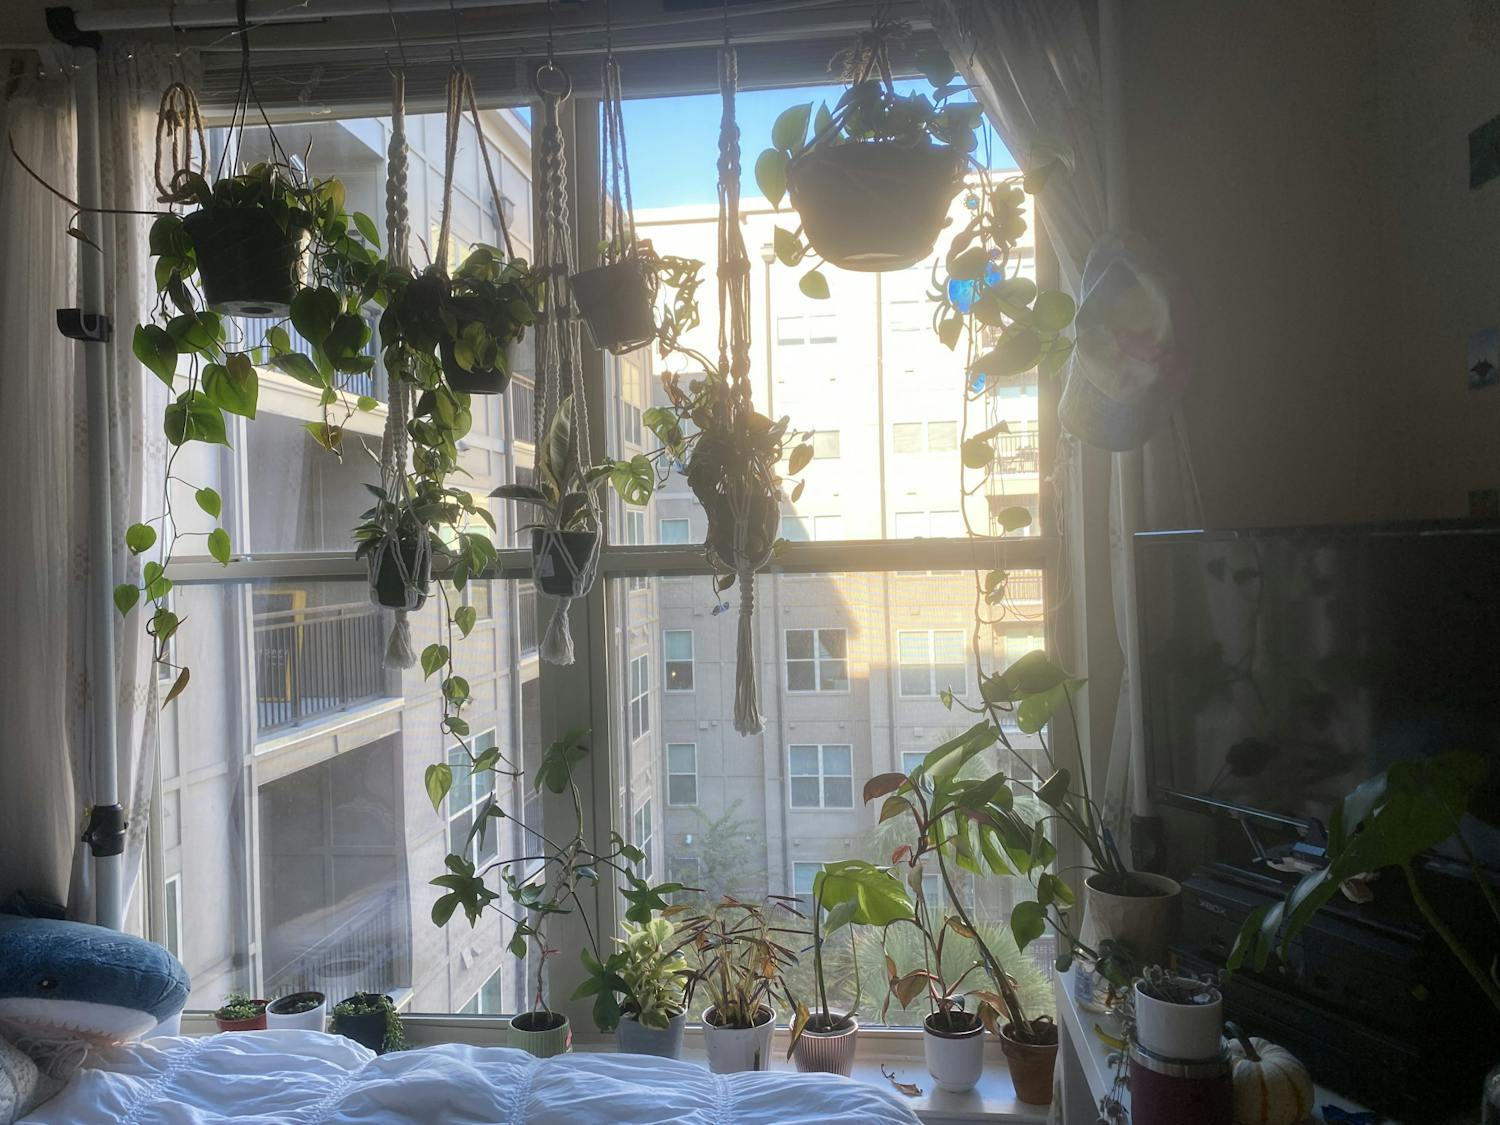 Potted plants hang from an apartment window on Sept. 21, 2022. These tiny viny hanging plants are known as pothos plants and are commonly grown in low light.